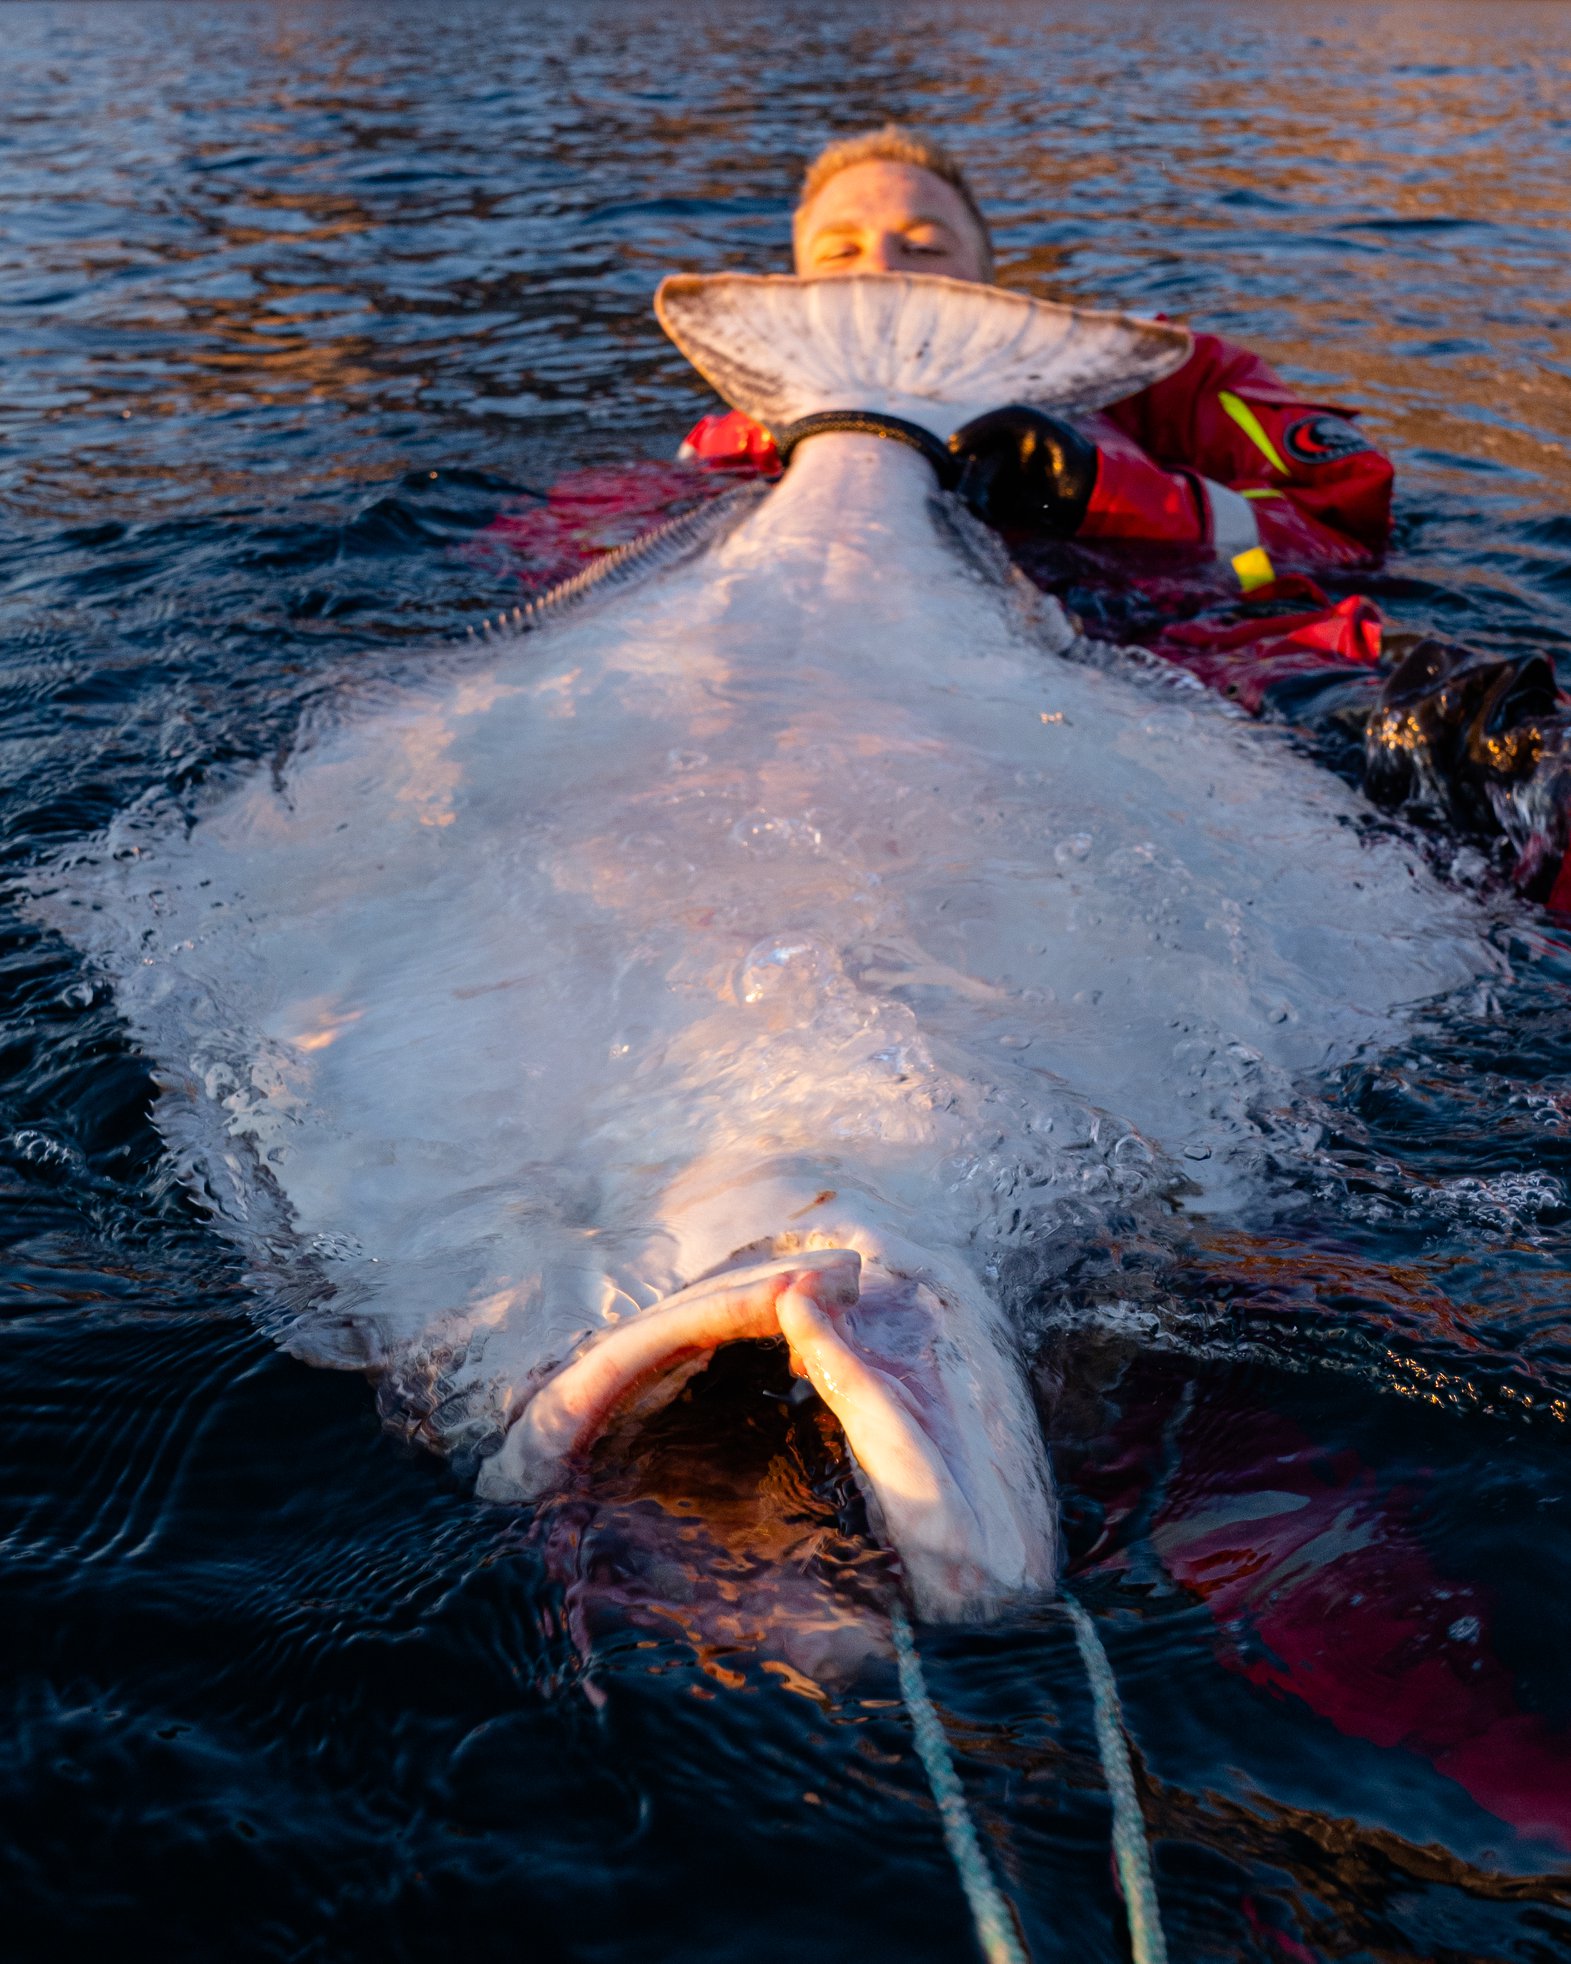 Large Halibut in Norway